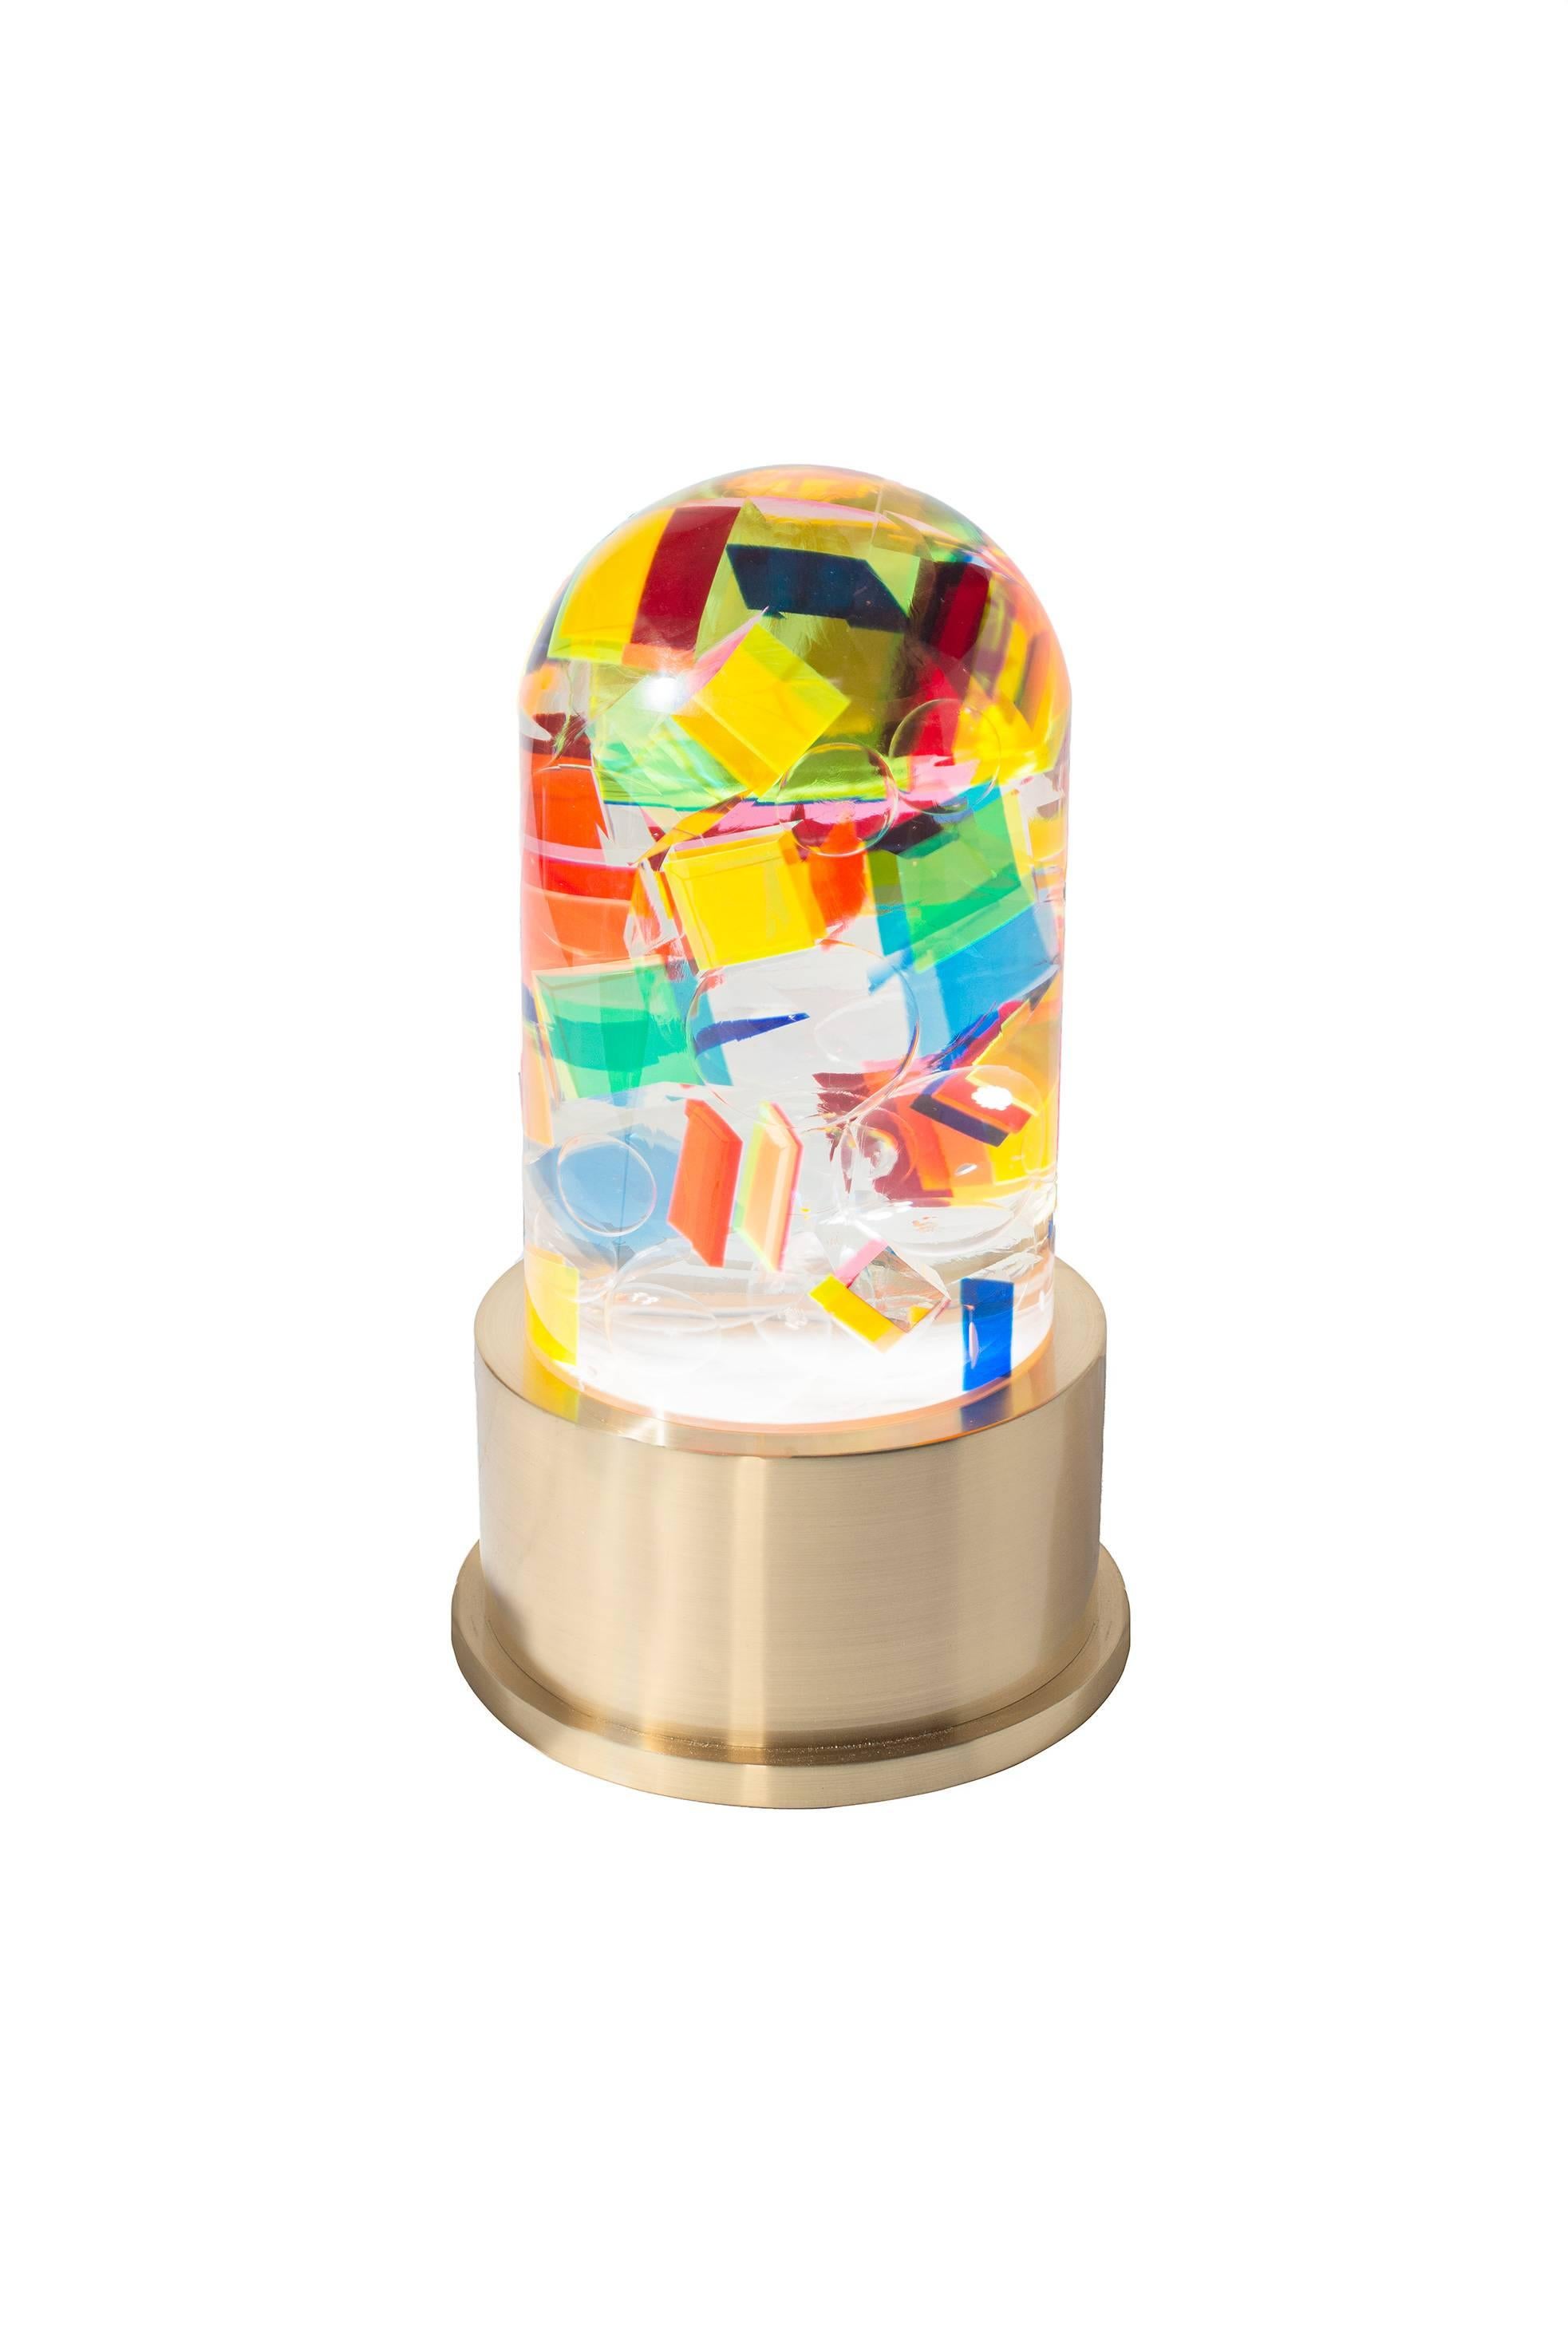 A beautiful and colorful plexiglass table lamp with brass base designed by Studio Superego for Superego Editions, in 2016. The lamp is called Caos for the effect obtained from the pieces of plexiglass incorporated inside along with transparent